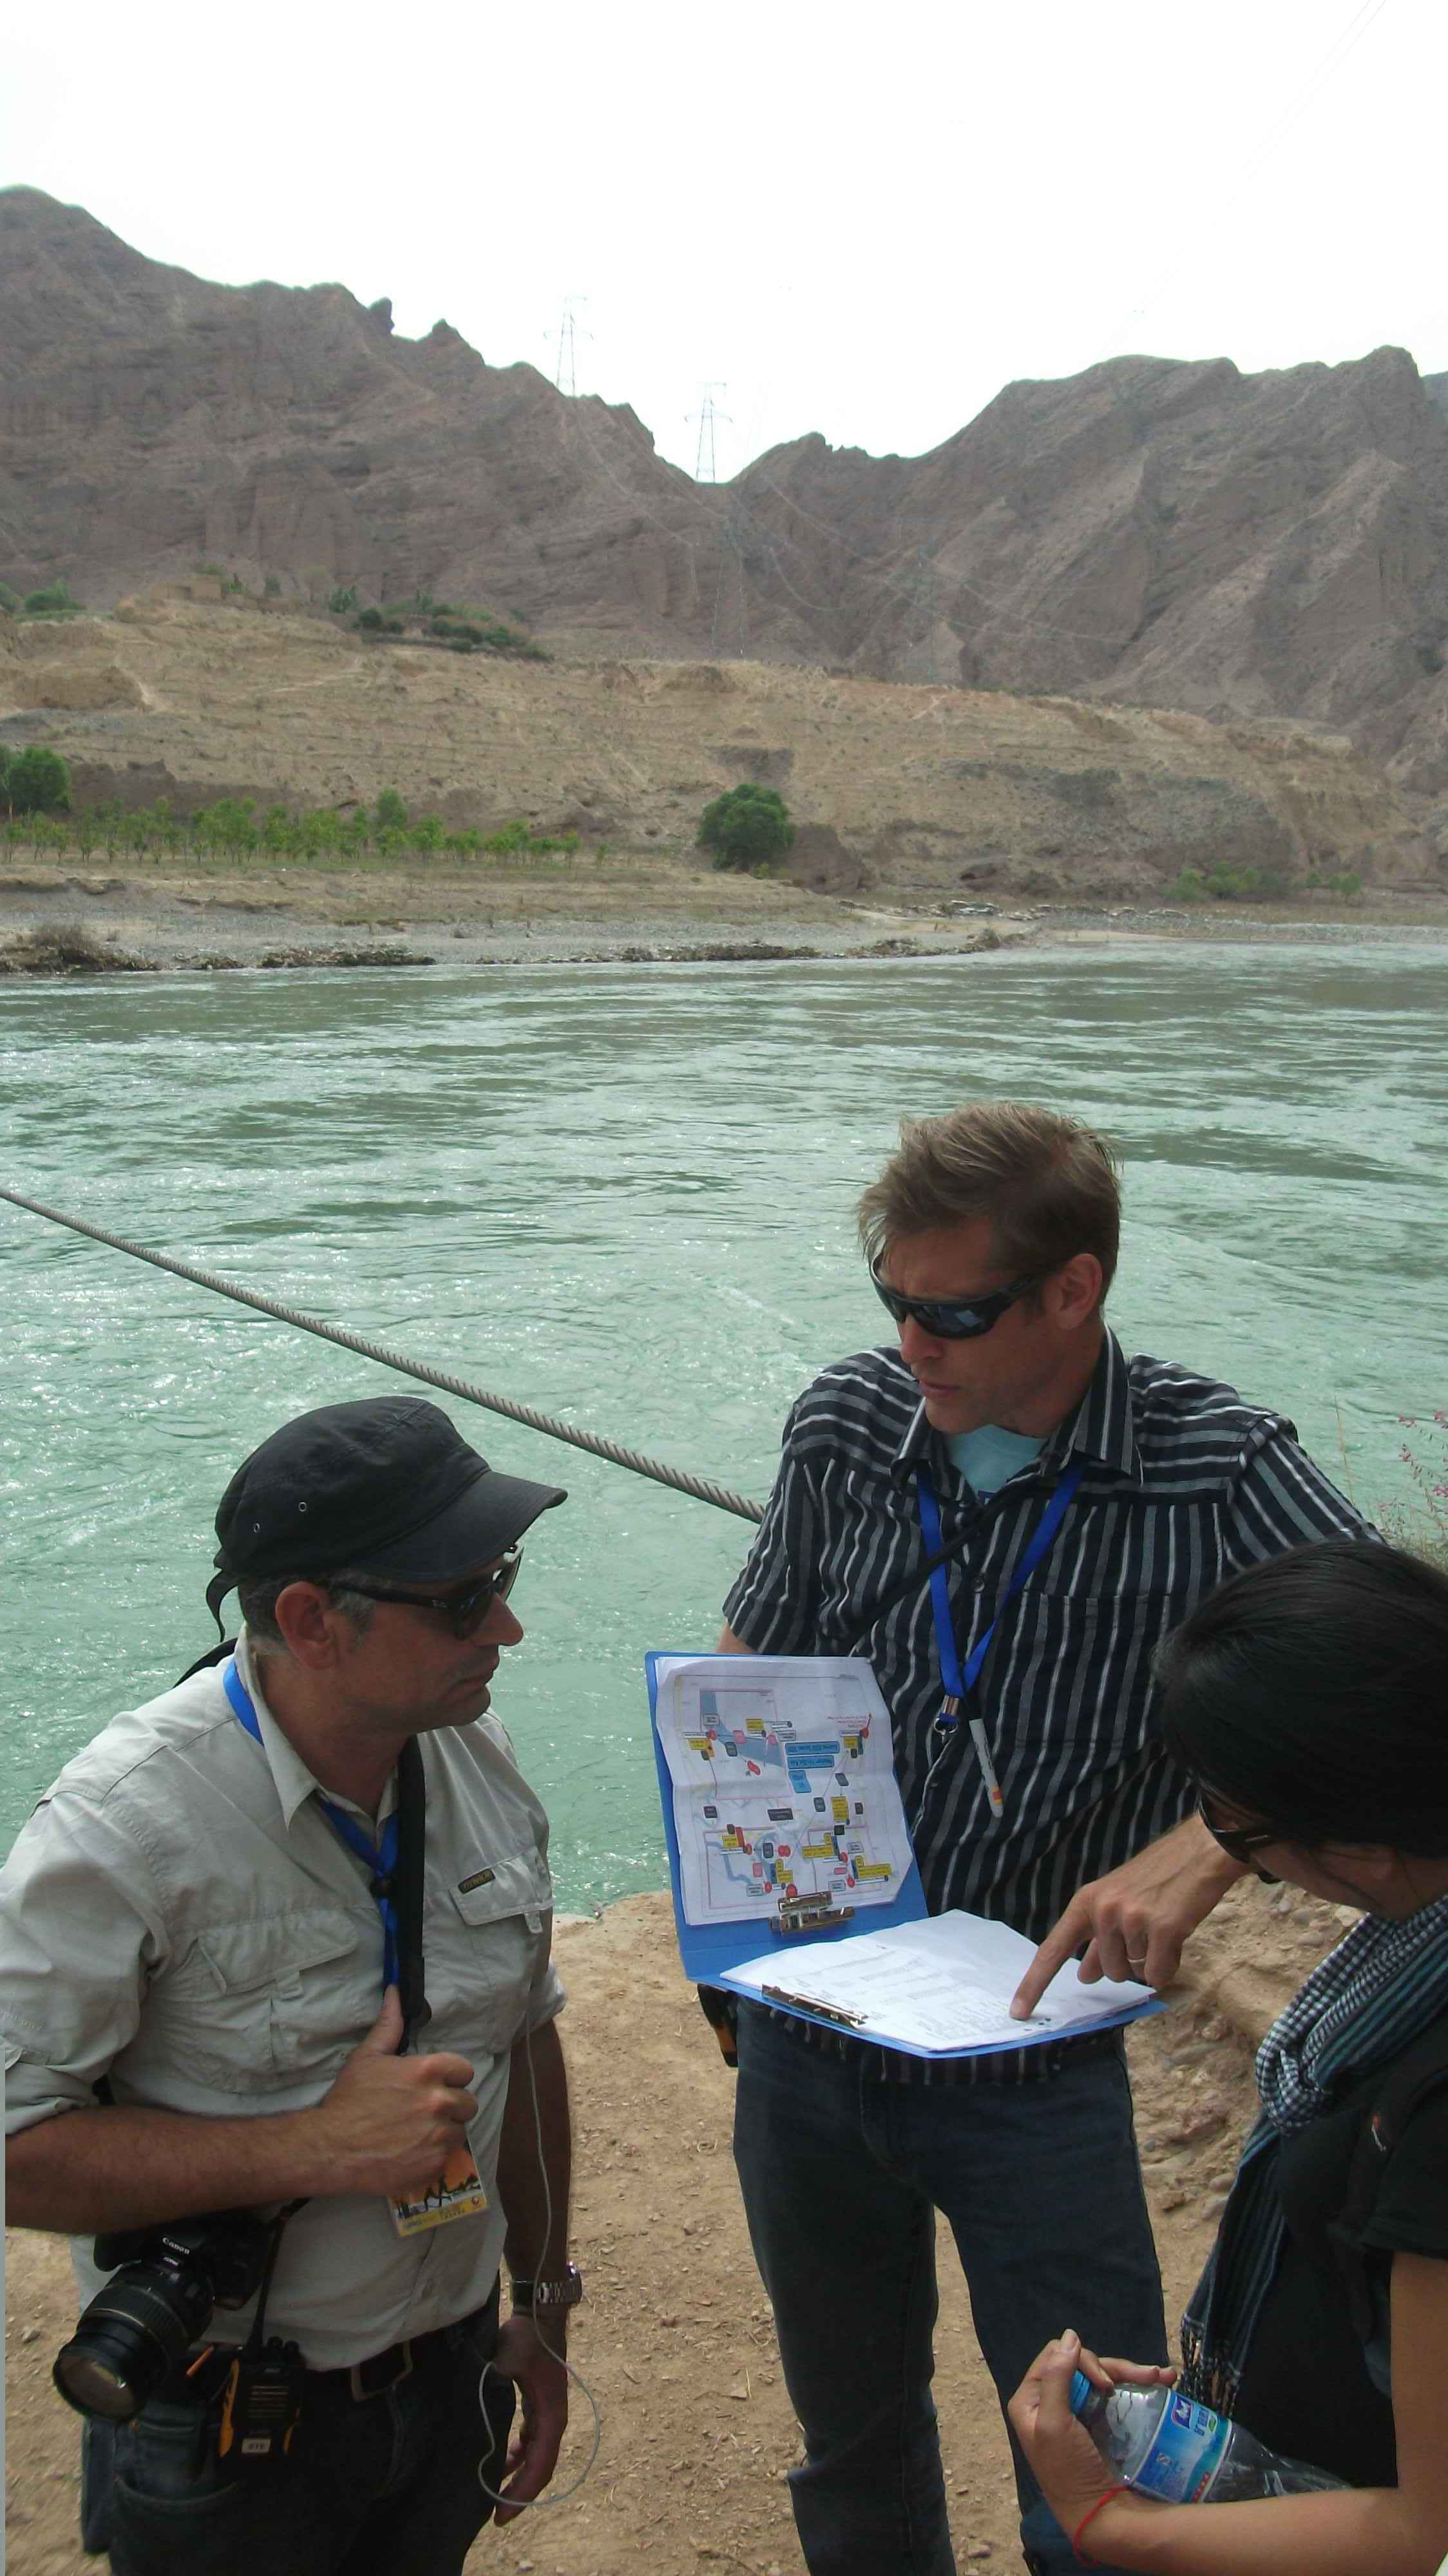 On location in Qinghai, China during filming of China Rush Season 3.